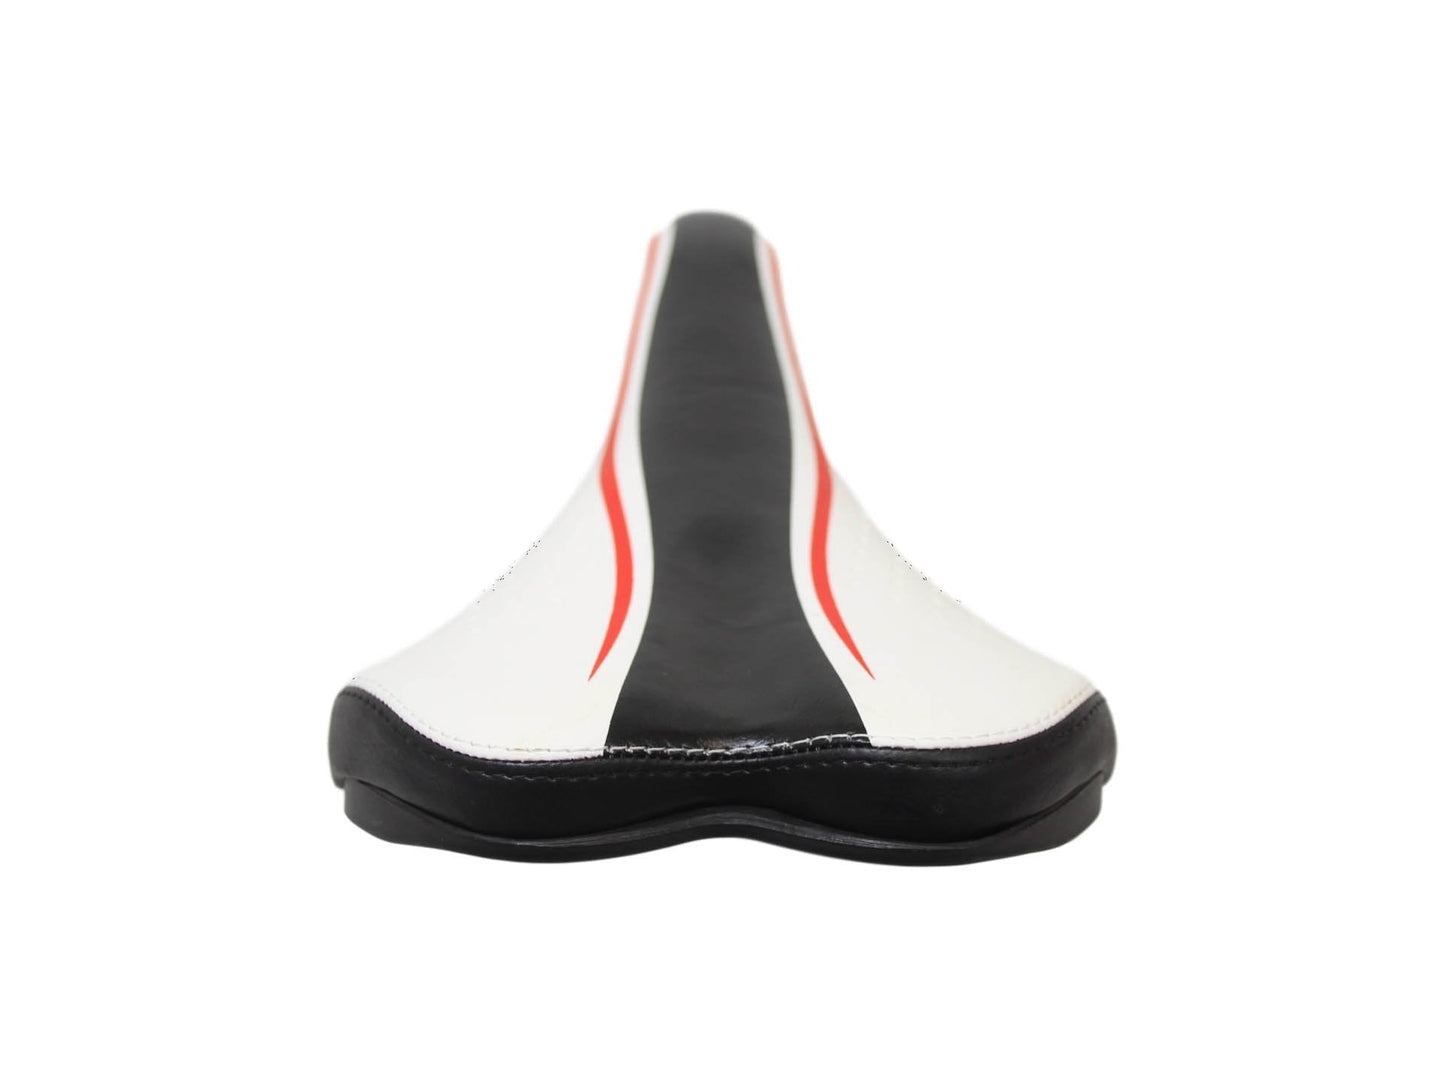 Soft Cushioned Bicycle Saddle Seat With Sports Print Design Comfort Ride 28 x 15cm 1833 (Parcel Rate)